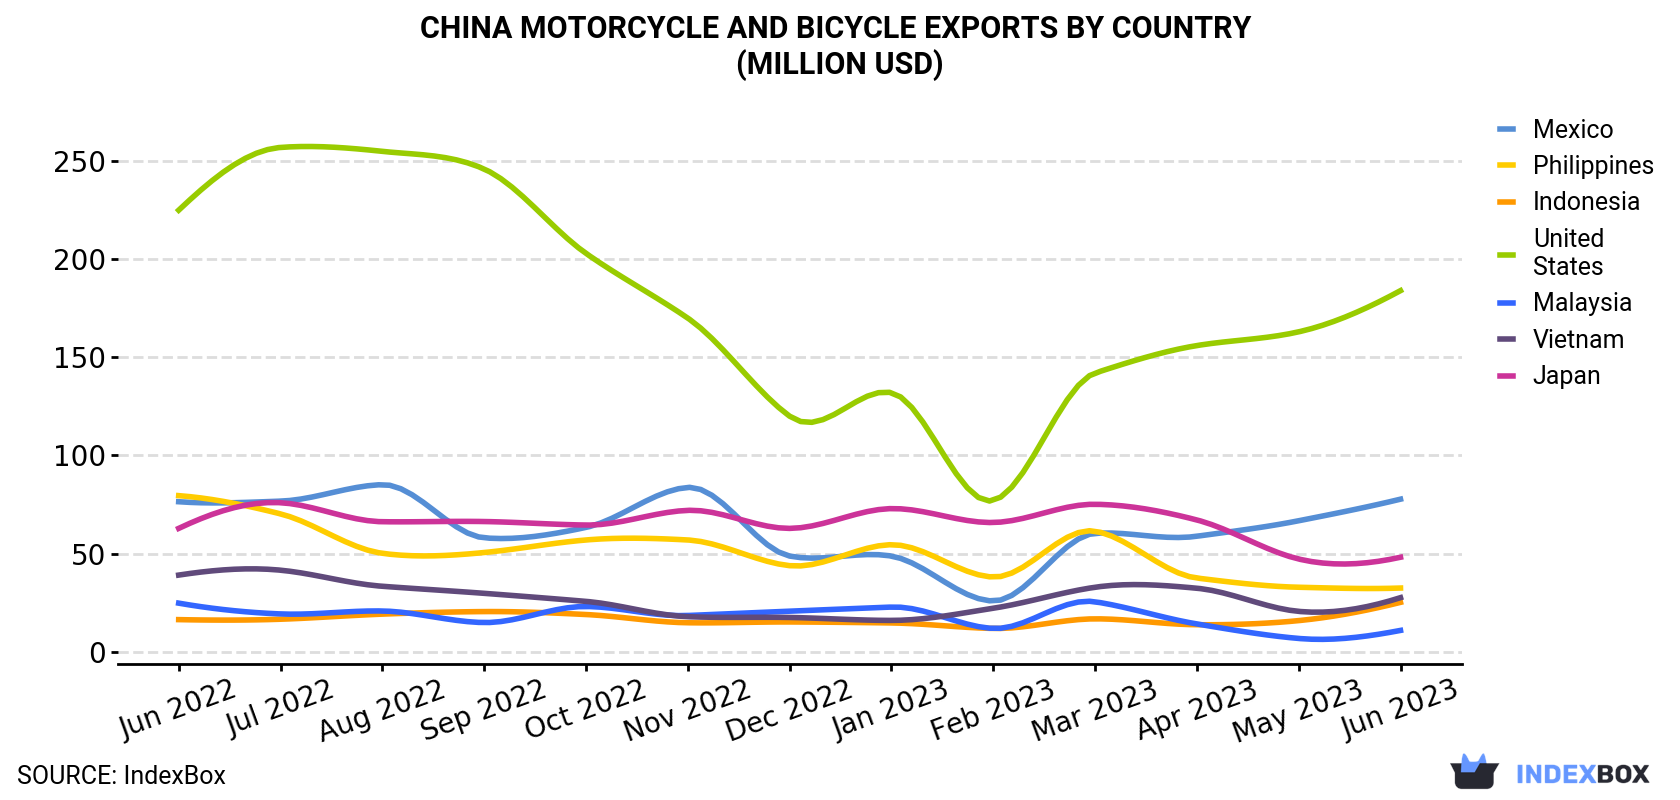 China Motorcycle And Bicycle Exports By Country (Million USD)